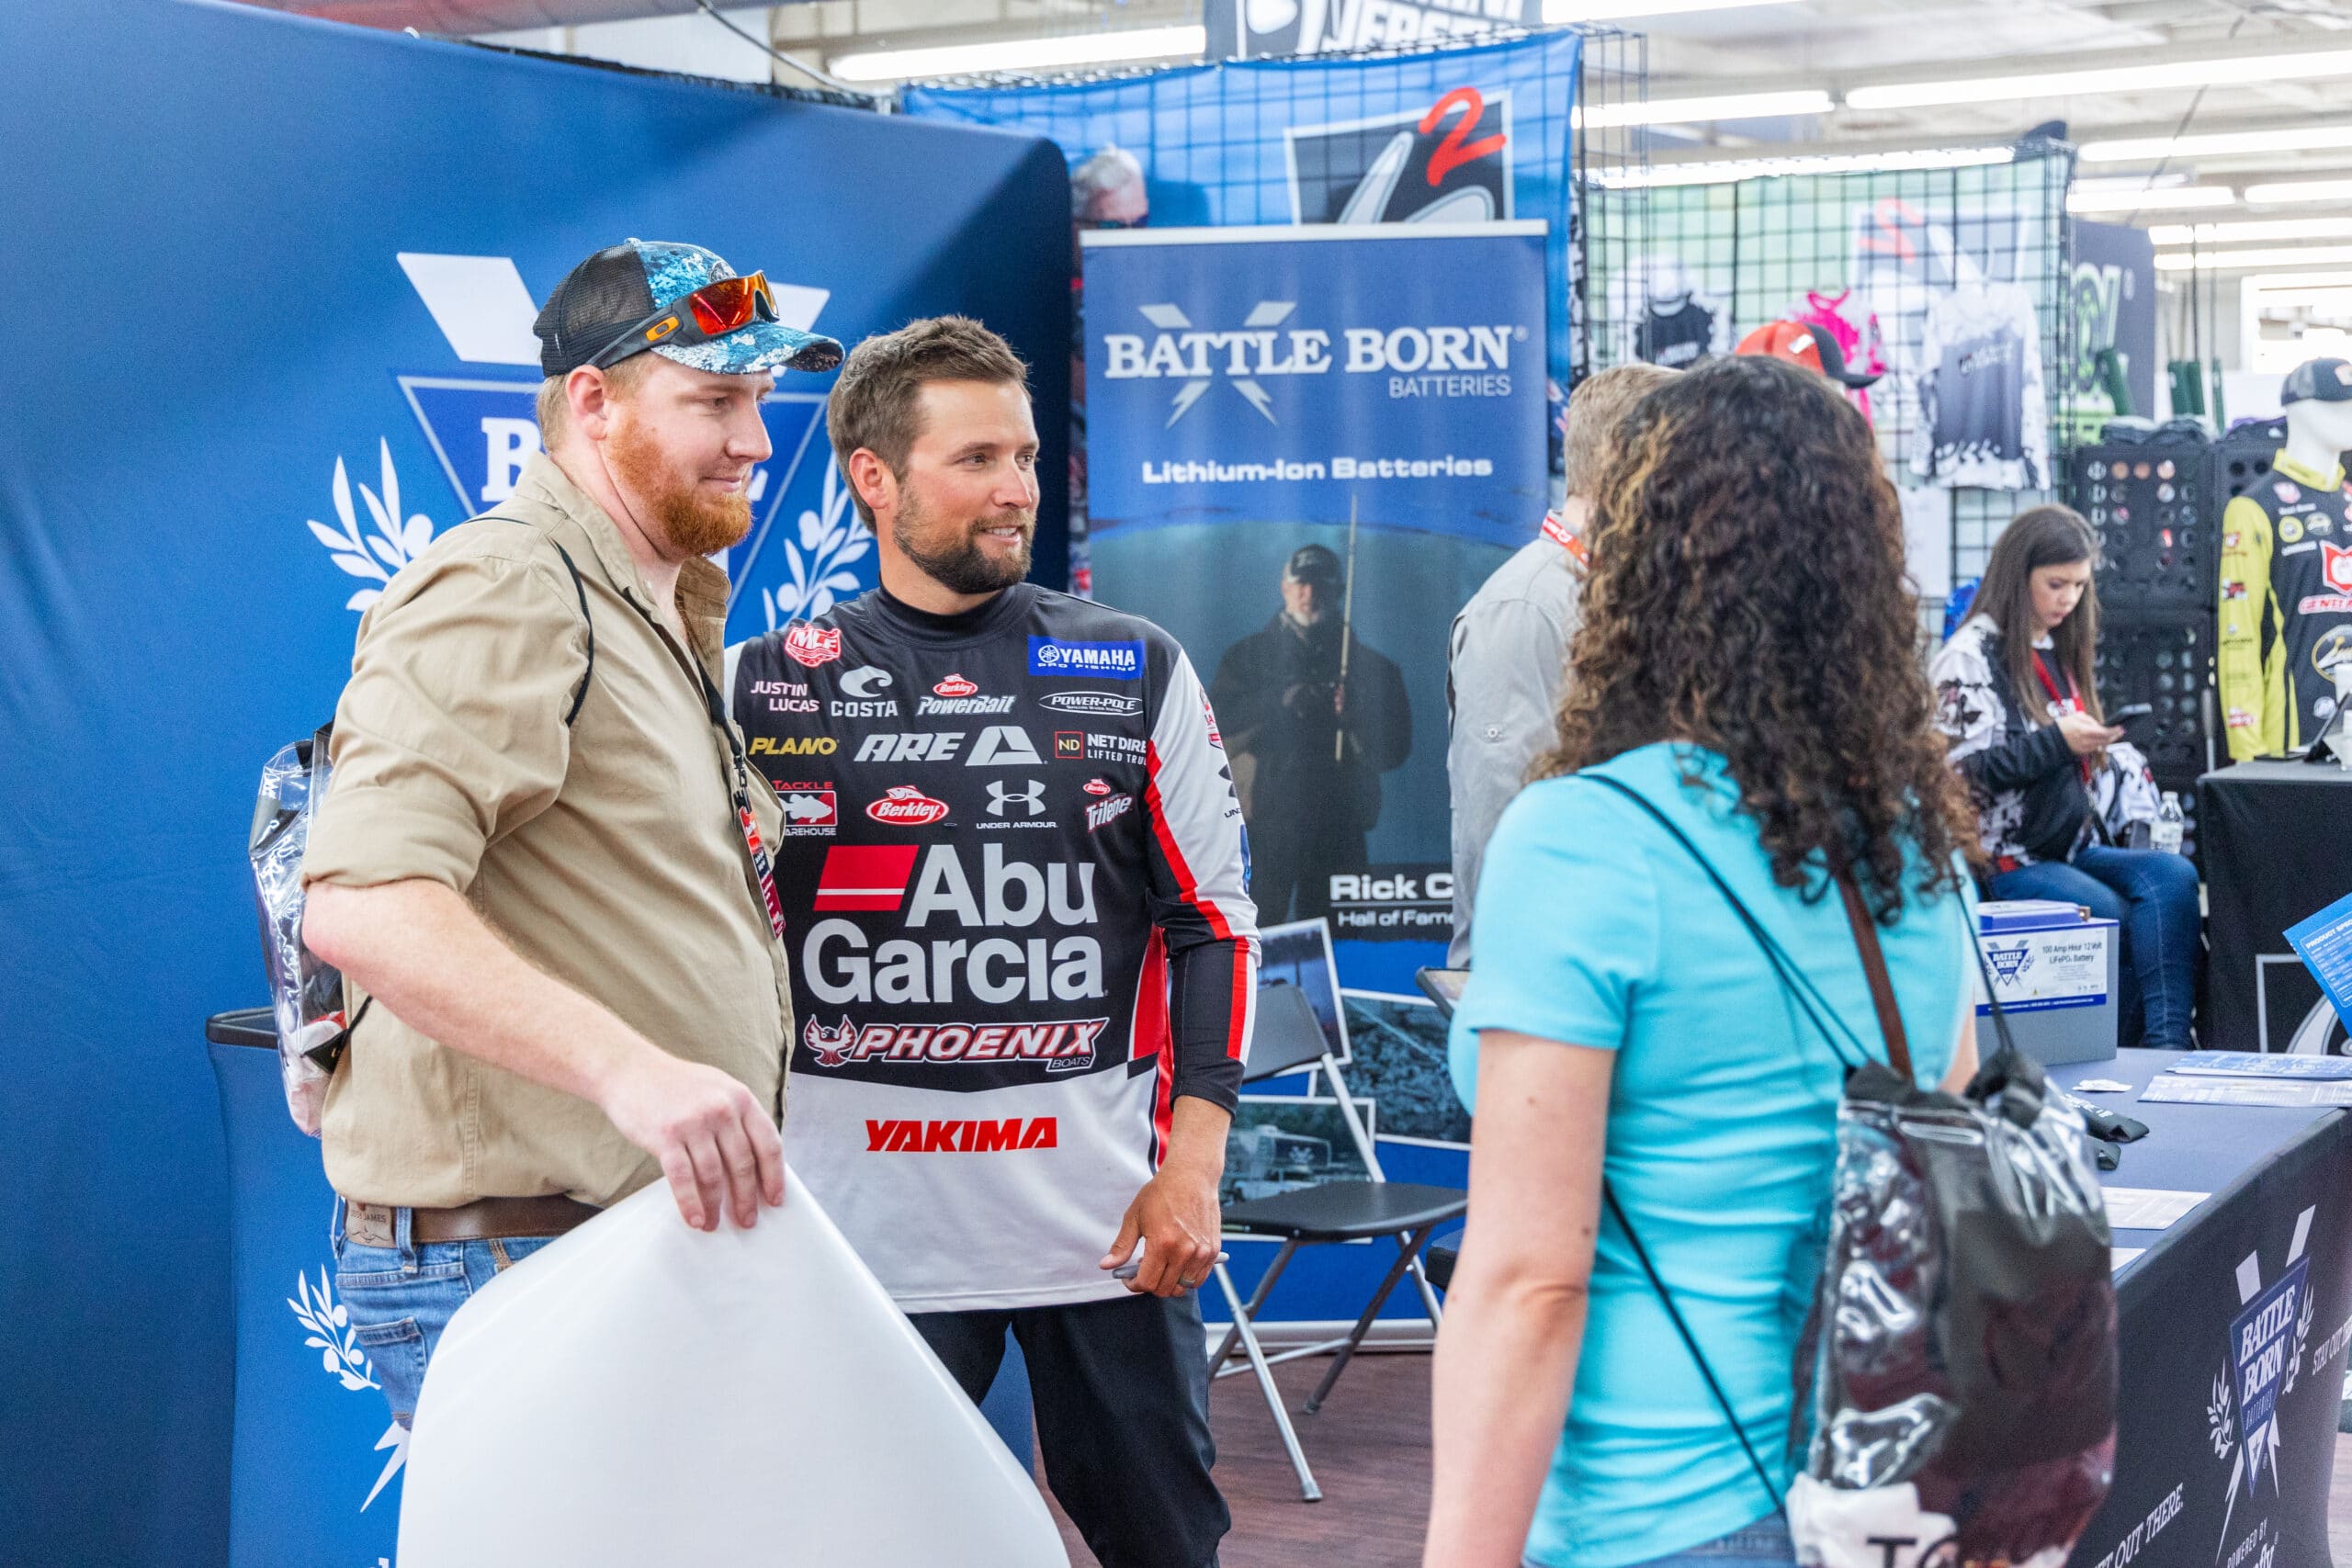 Professional Angler Justin Lucas at the Battle Born Batteries Booth